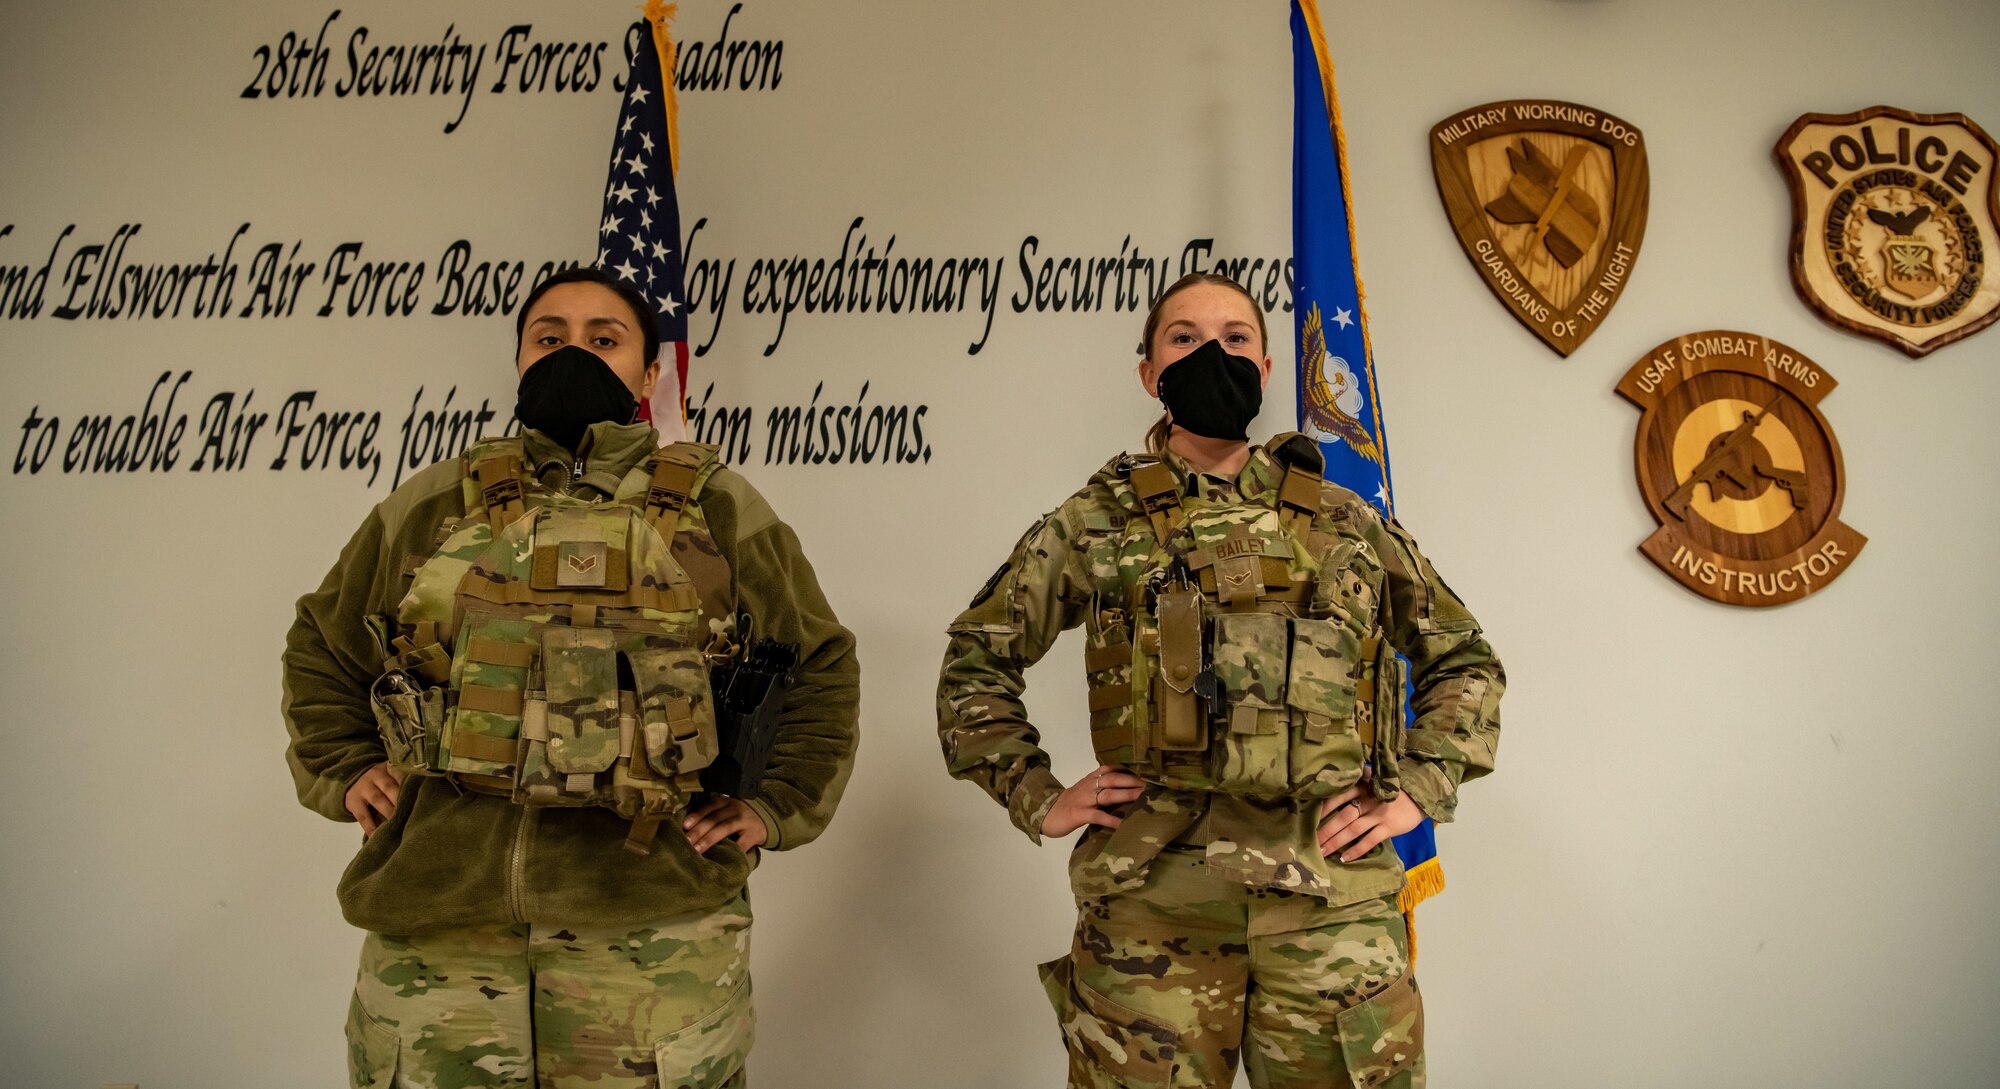 Two defenders from the 28th Security Forces Squadron wear their newly-acquired Aspetto Mach V Female Body Armor (FBA) systems at Ellsworth Air Force Base, S.D., March 17, 2021. The new FBA is designed specifically to fit female Airmen. More than 7,000 FBA vests have been produced and will be distributed throughout 2021 to active-duty, guard and reserve units. (U.S. Air Force photo by Airman Jonah Fronk)